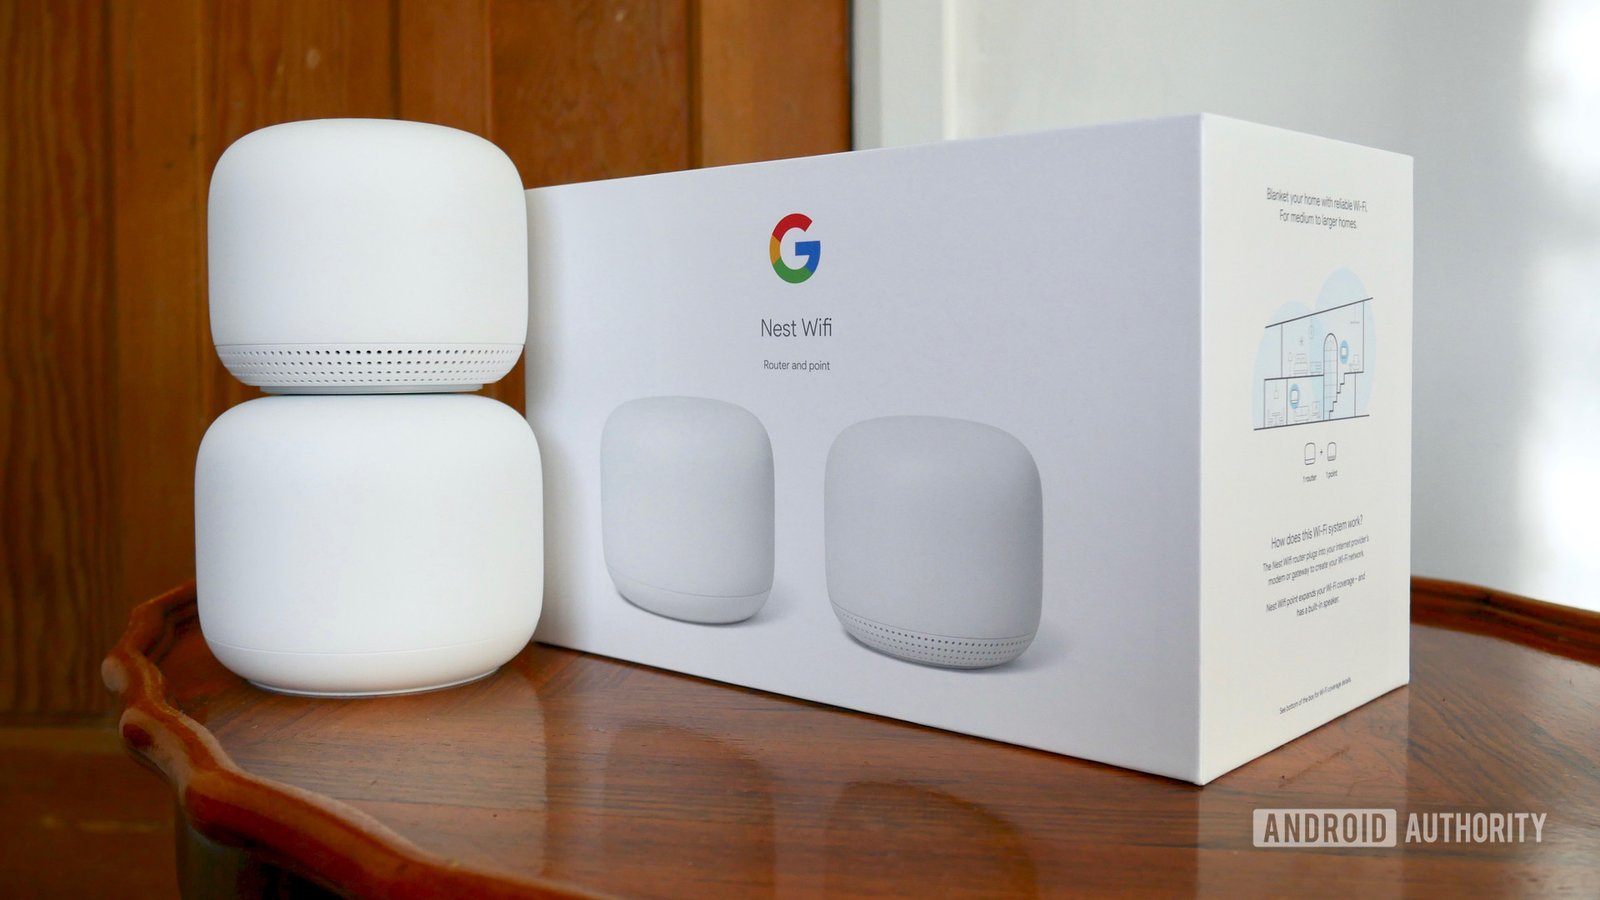 Upgrade your internet with 72% off the Google Nest Wifi system